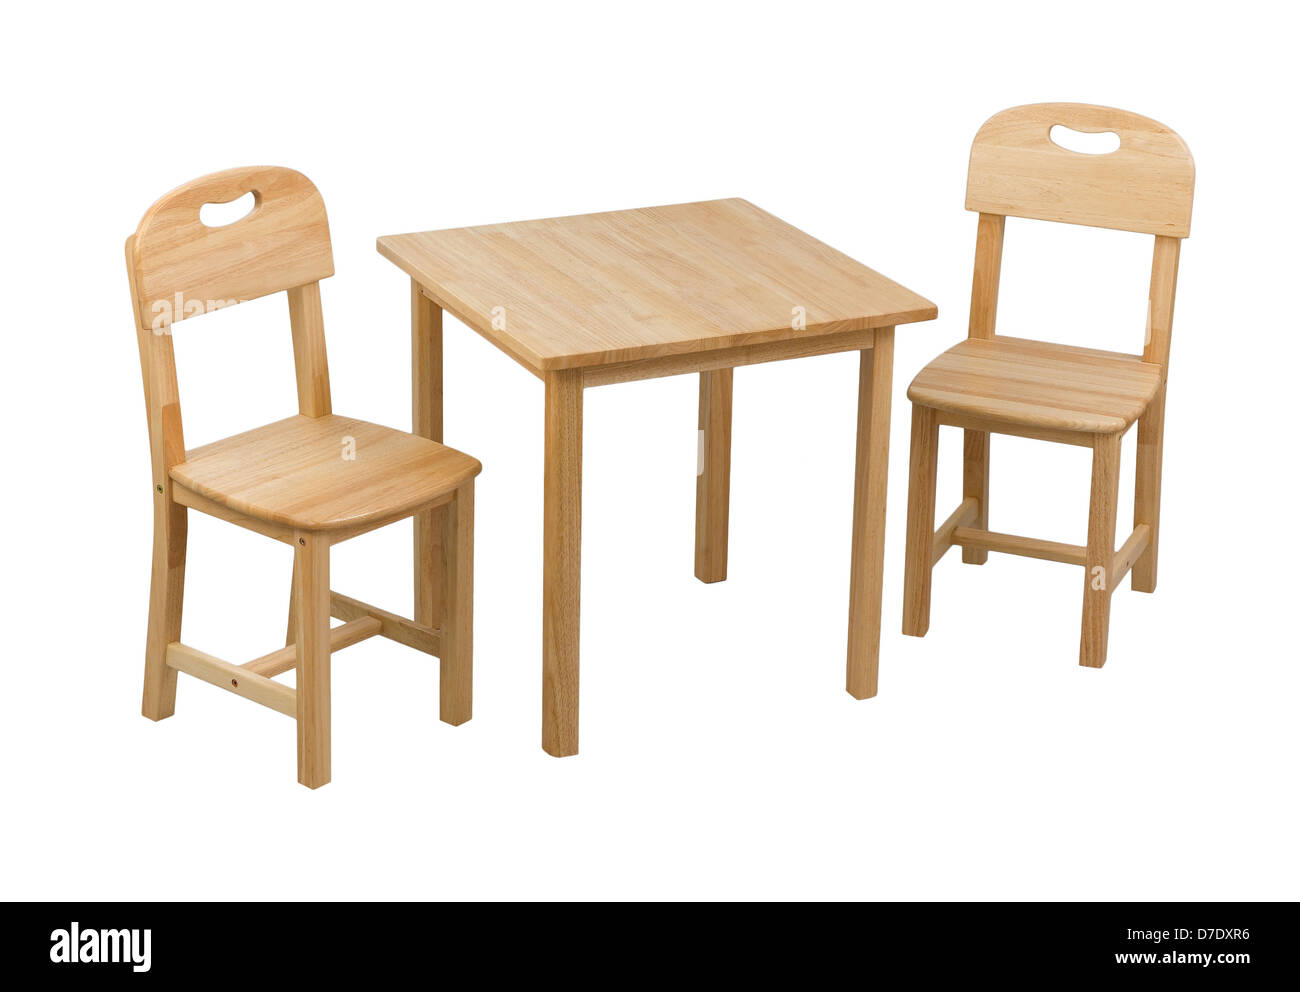 A Small Wooden Chairs And Desk For Kids Stock Photo 56240106 Alamy